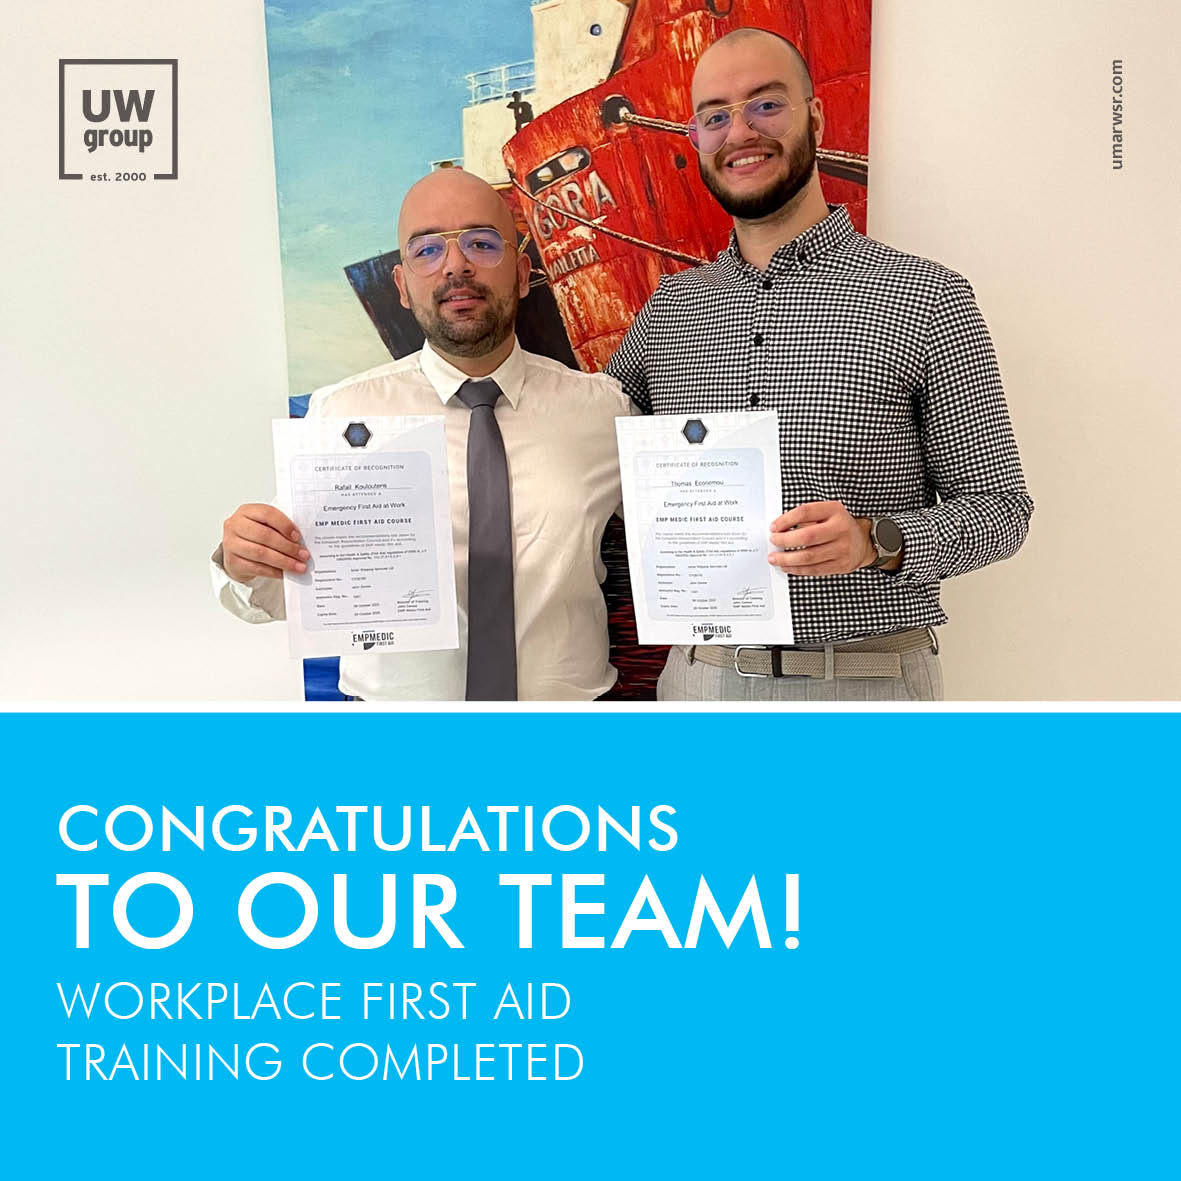 Congratulations to our team for completing the Workplace First Aid and CPR Training, along with the training needed for using the Automated External Defibrillator! Thank you to EMP Medic First Aid for their amazing training! 🚑

#UMARWSR #UWGroup #ShipRepairs #MarineEquipment